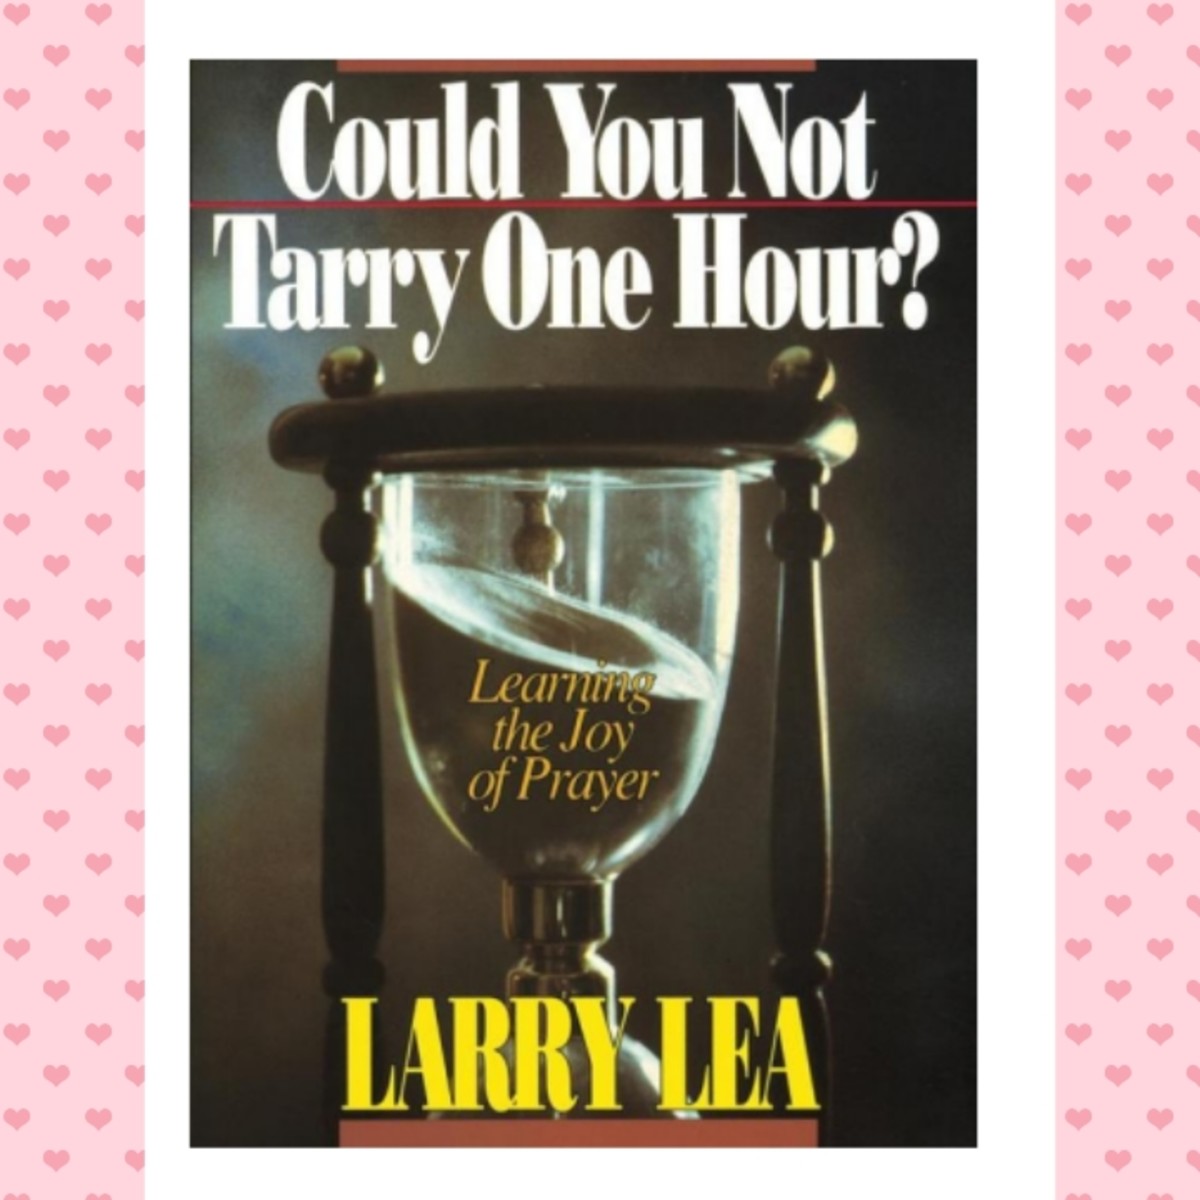 Could You Not Tarry One Hour? by Larry Lea #5 Book Review